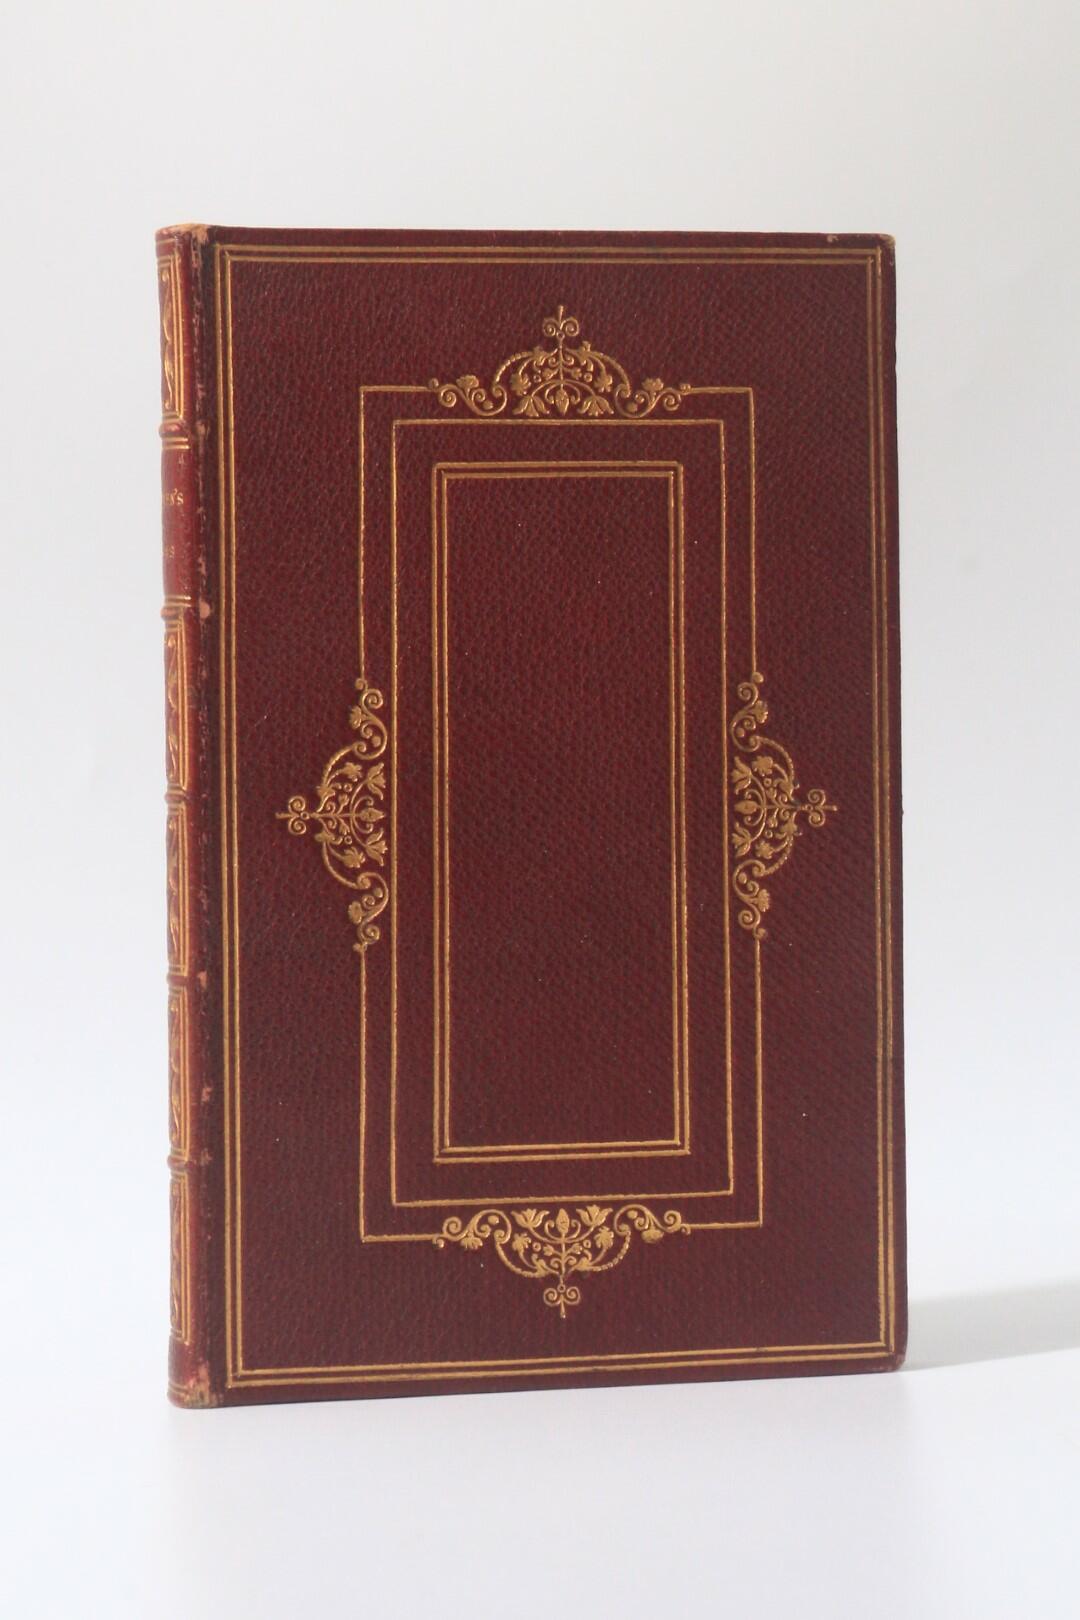 Henry H Methuen - Poems - William Pickering, 1843, Signed First Edition.